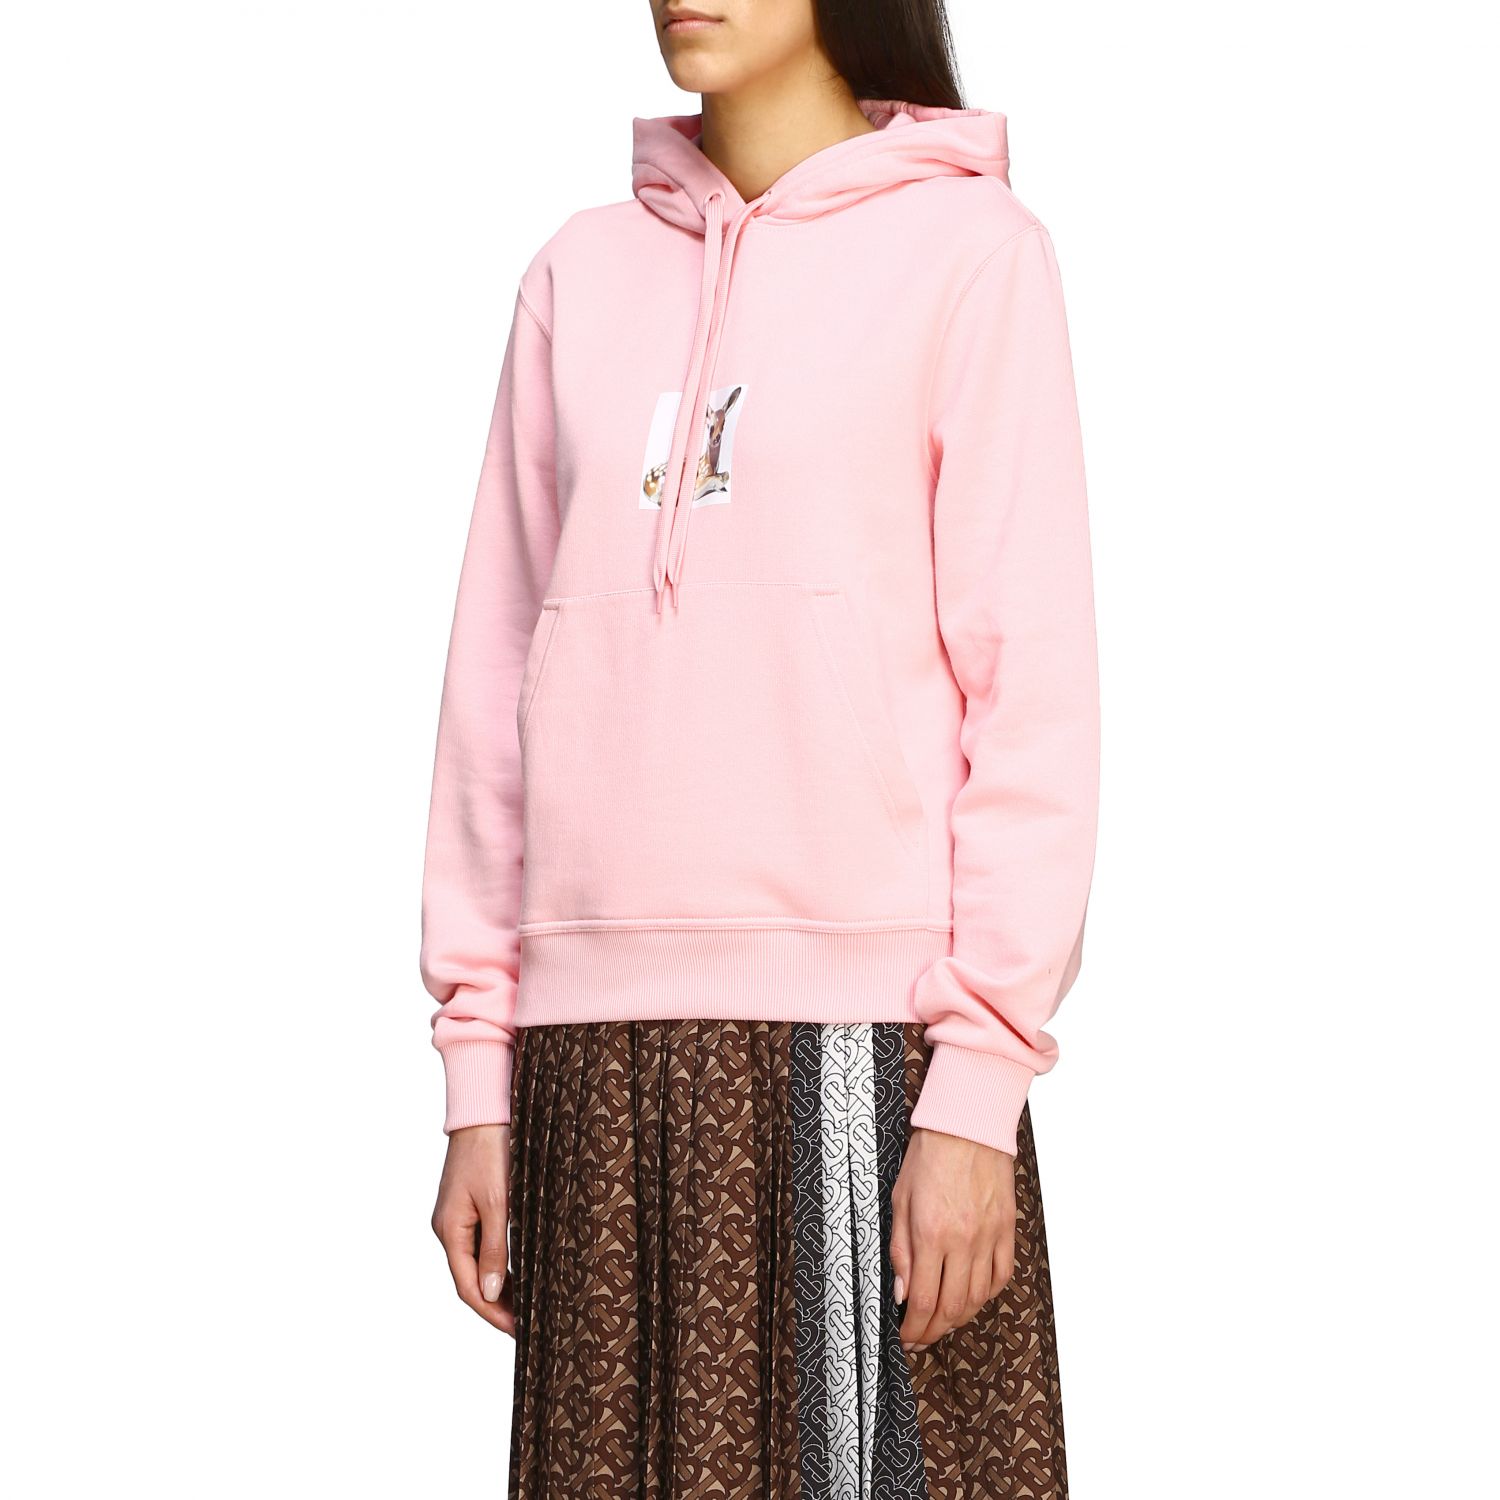 Burberry Outlet: hooded sweatshirt with fawn print | Sweatshirt ...